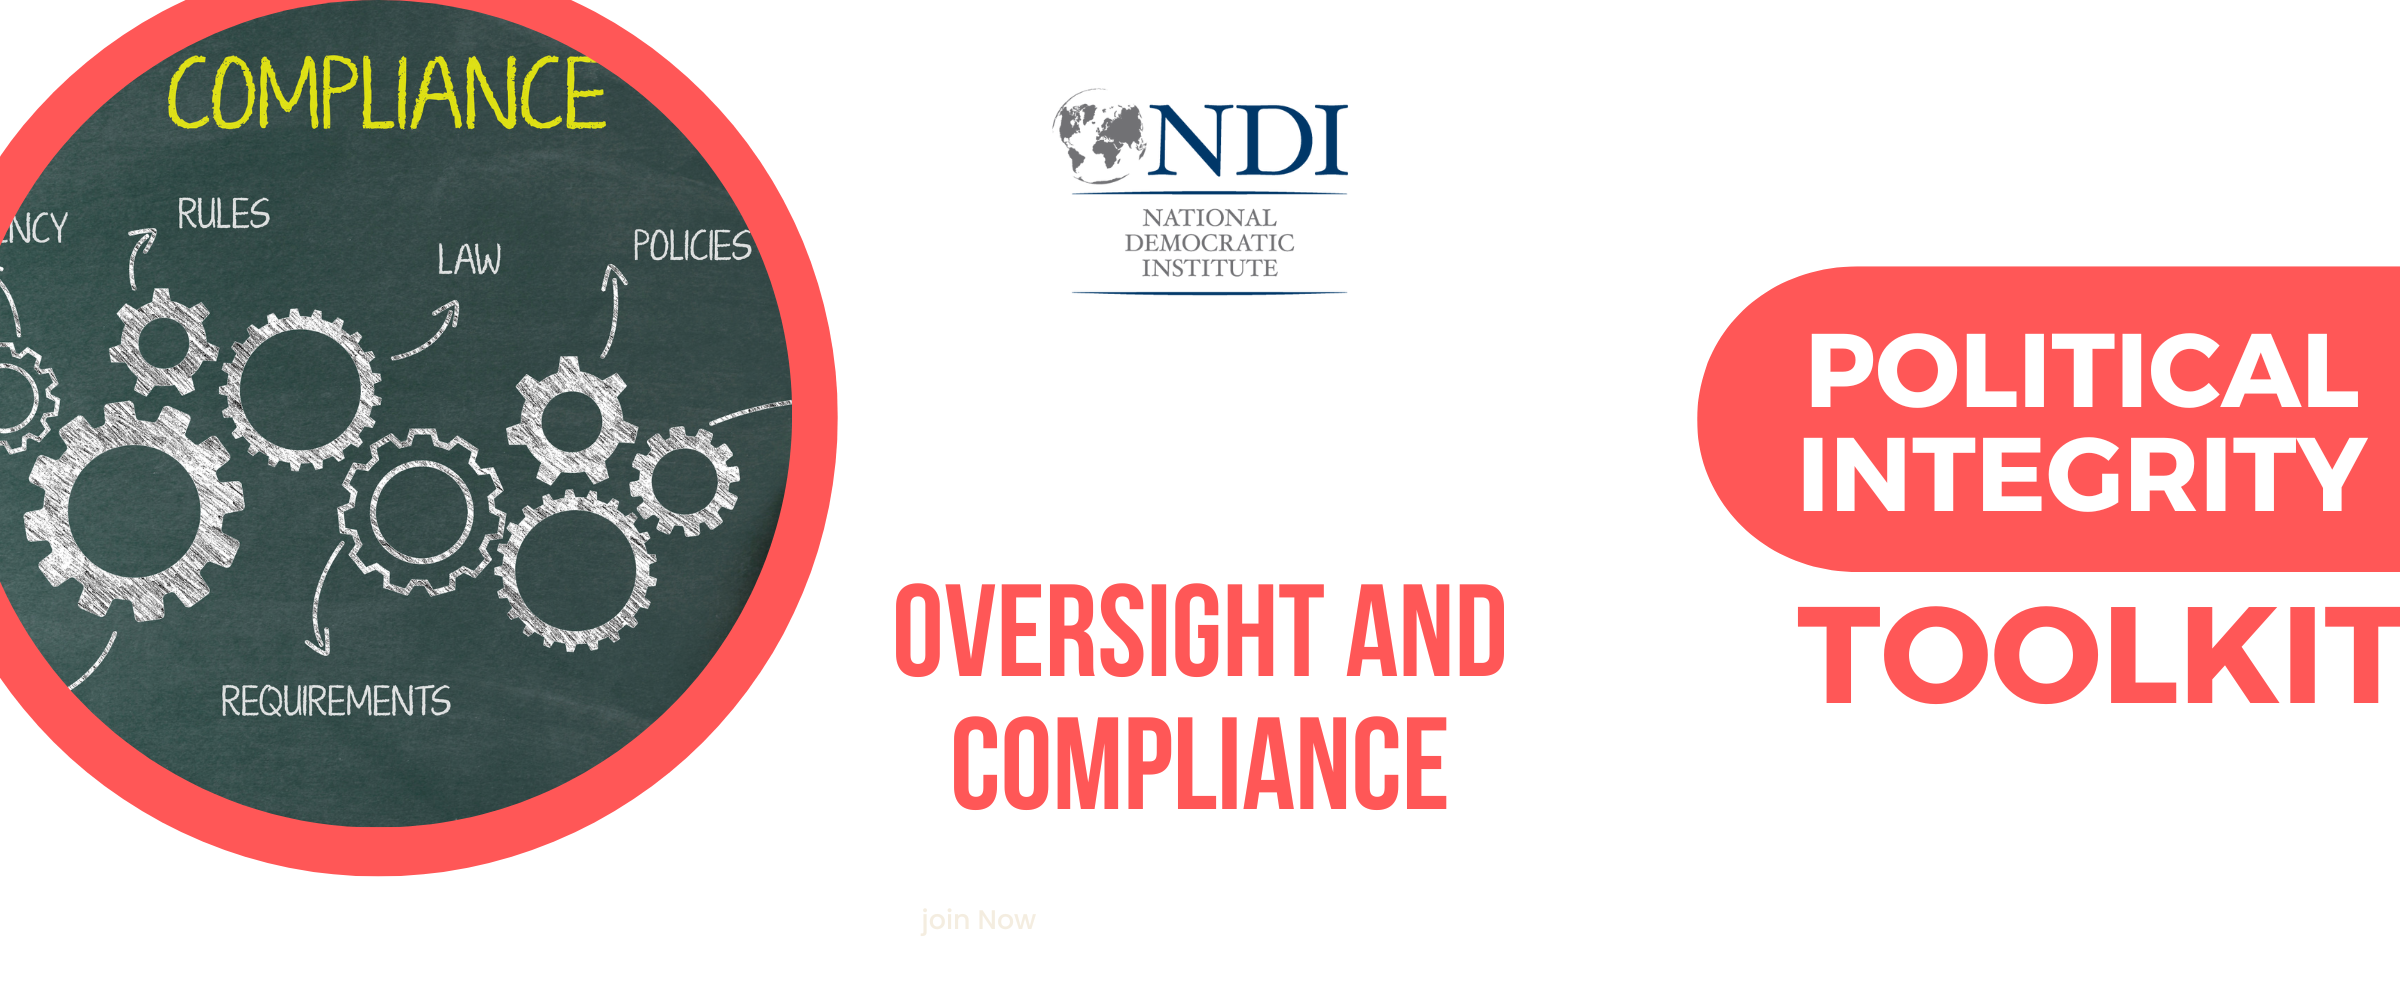 Oversight and Compliance